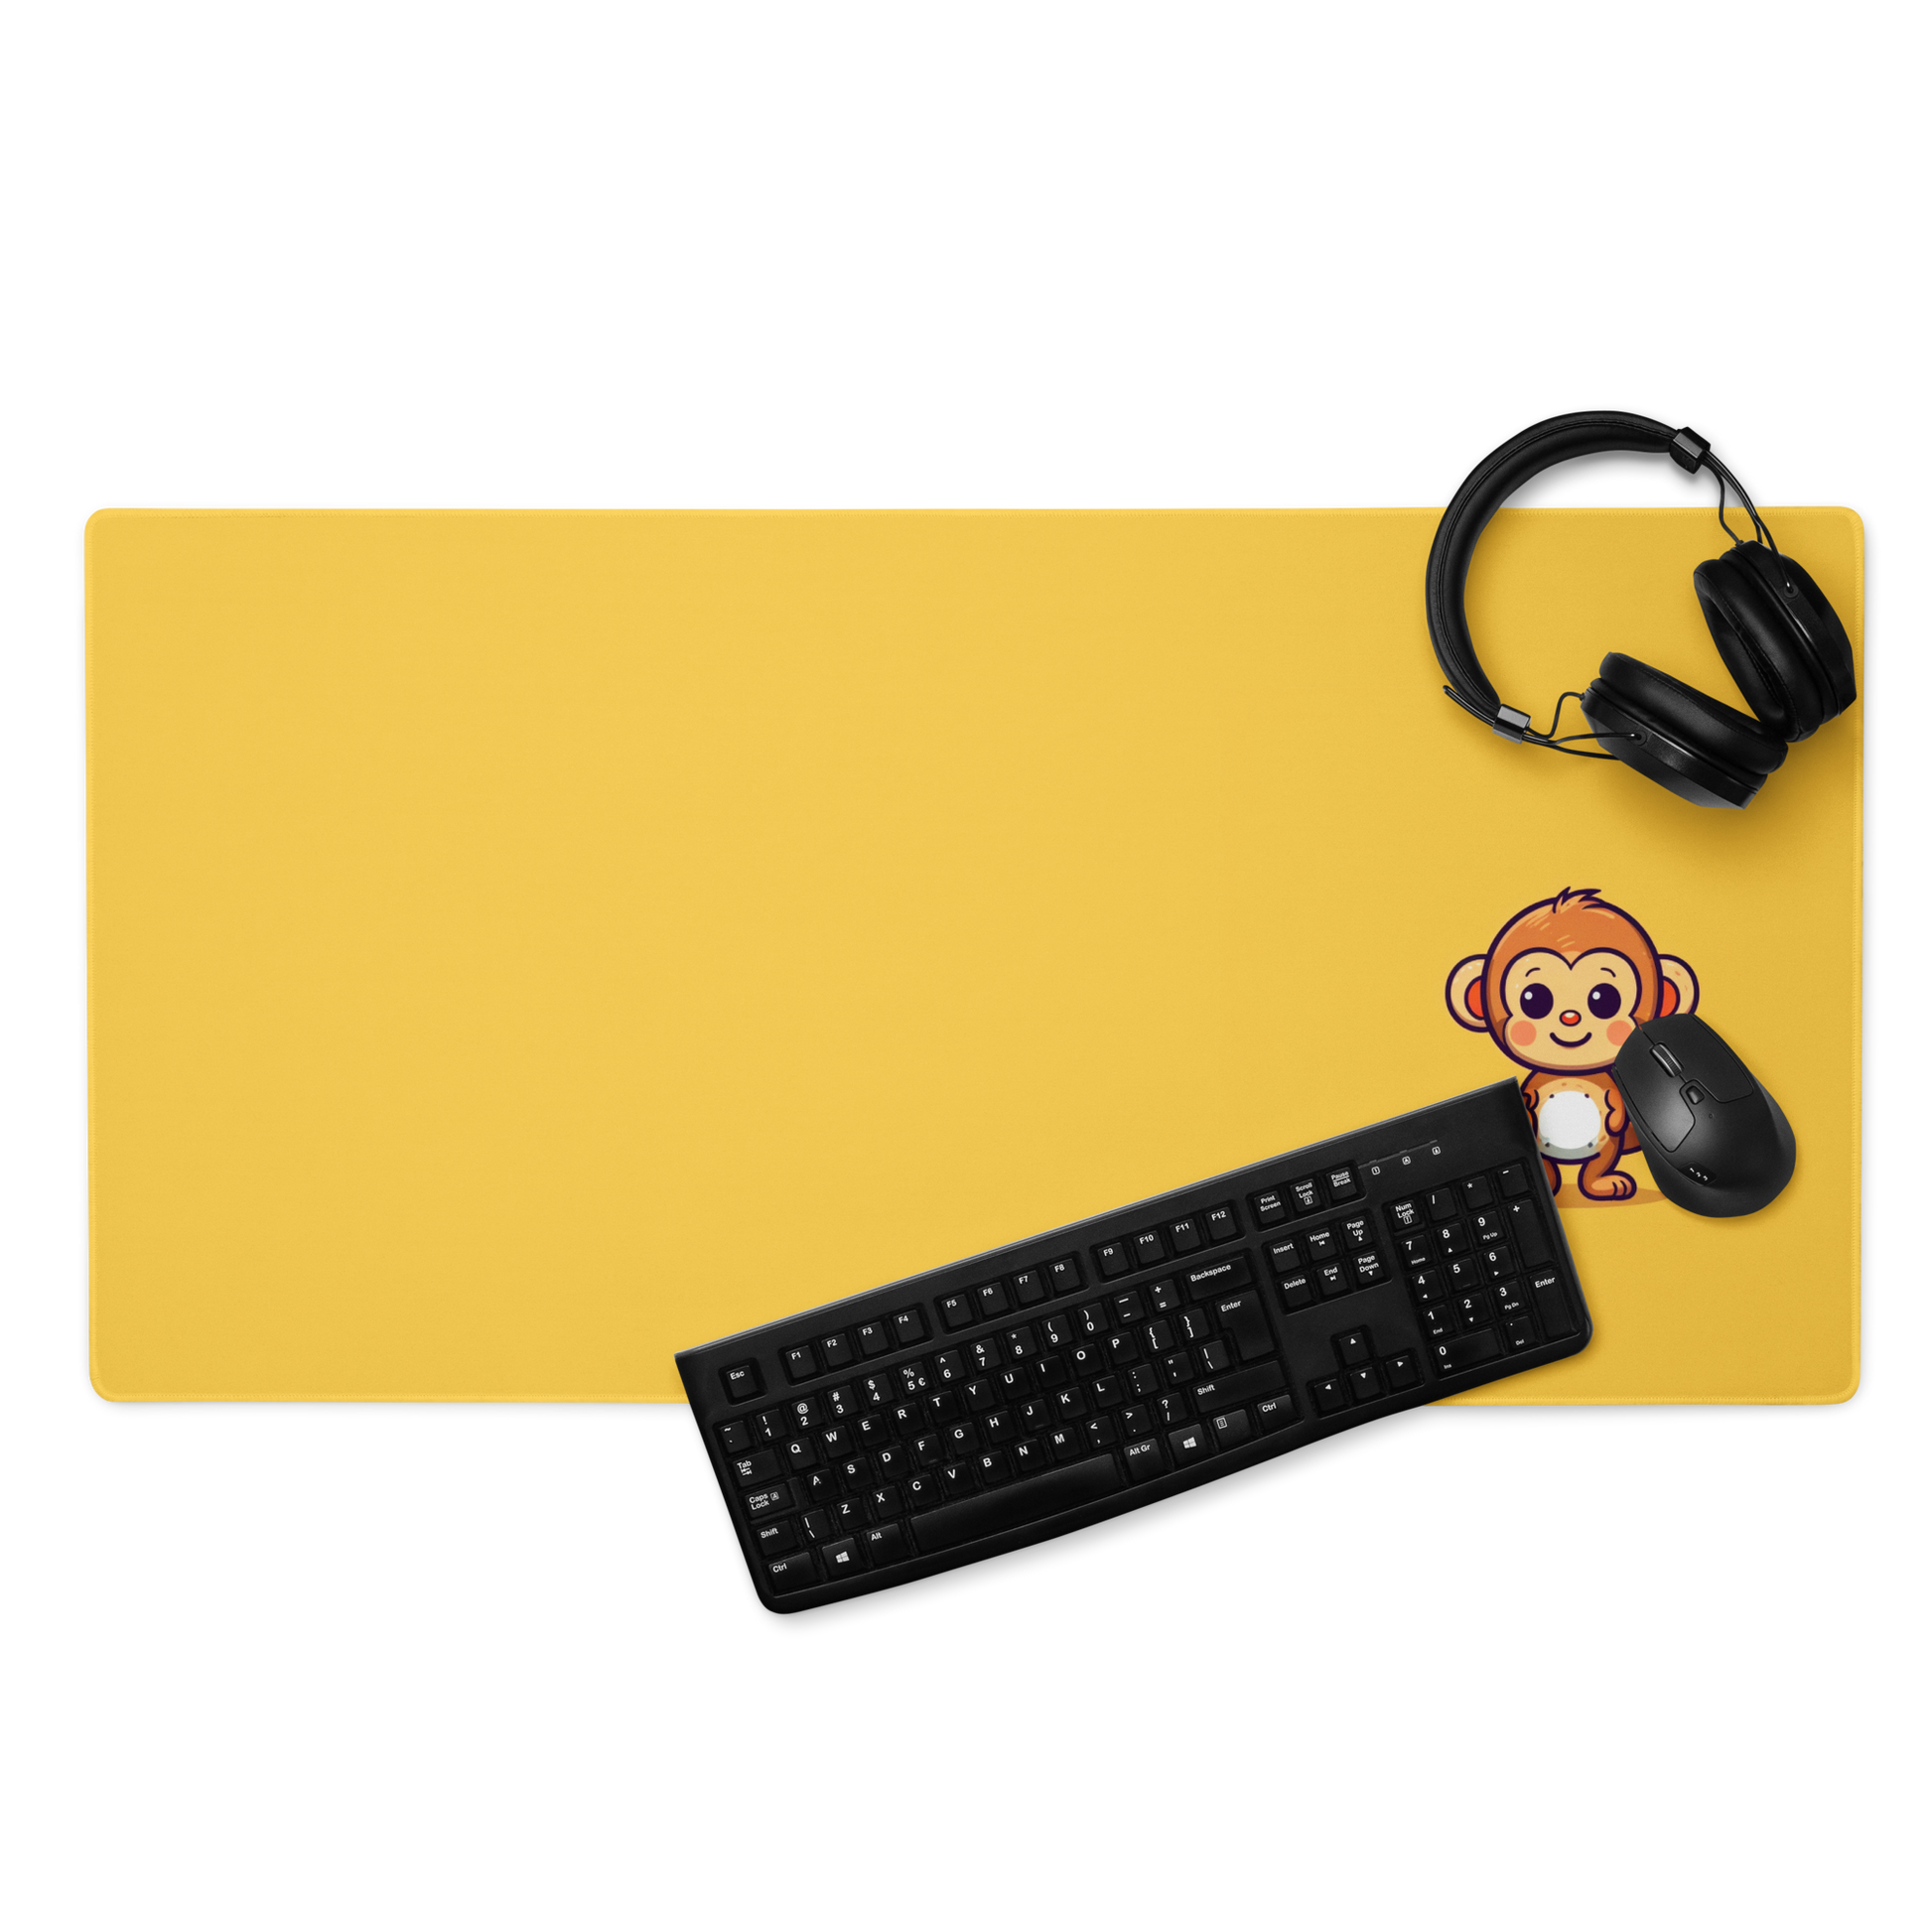 A 36" x 18" desk pad with a cute monkey holding bananas displayed with headphones, a keyboard and a mouse on it. Yellow in color.